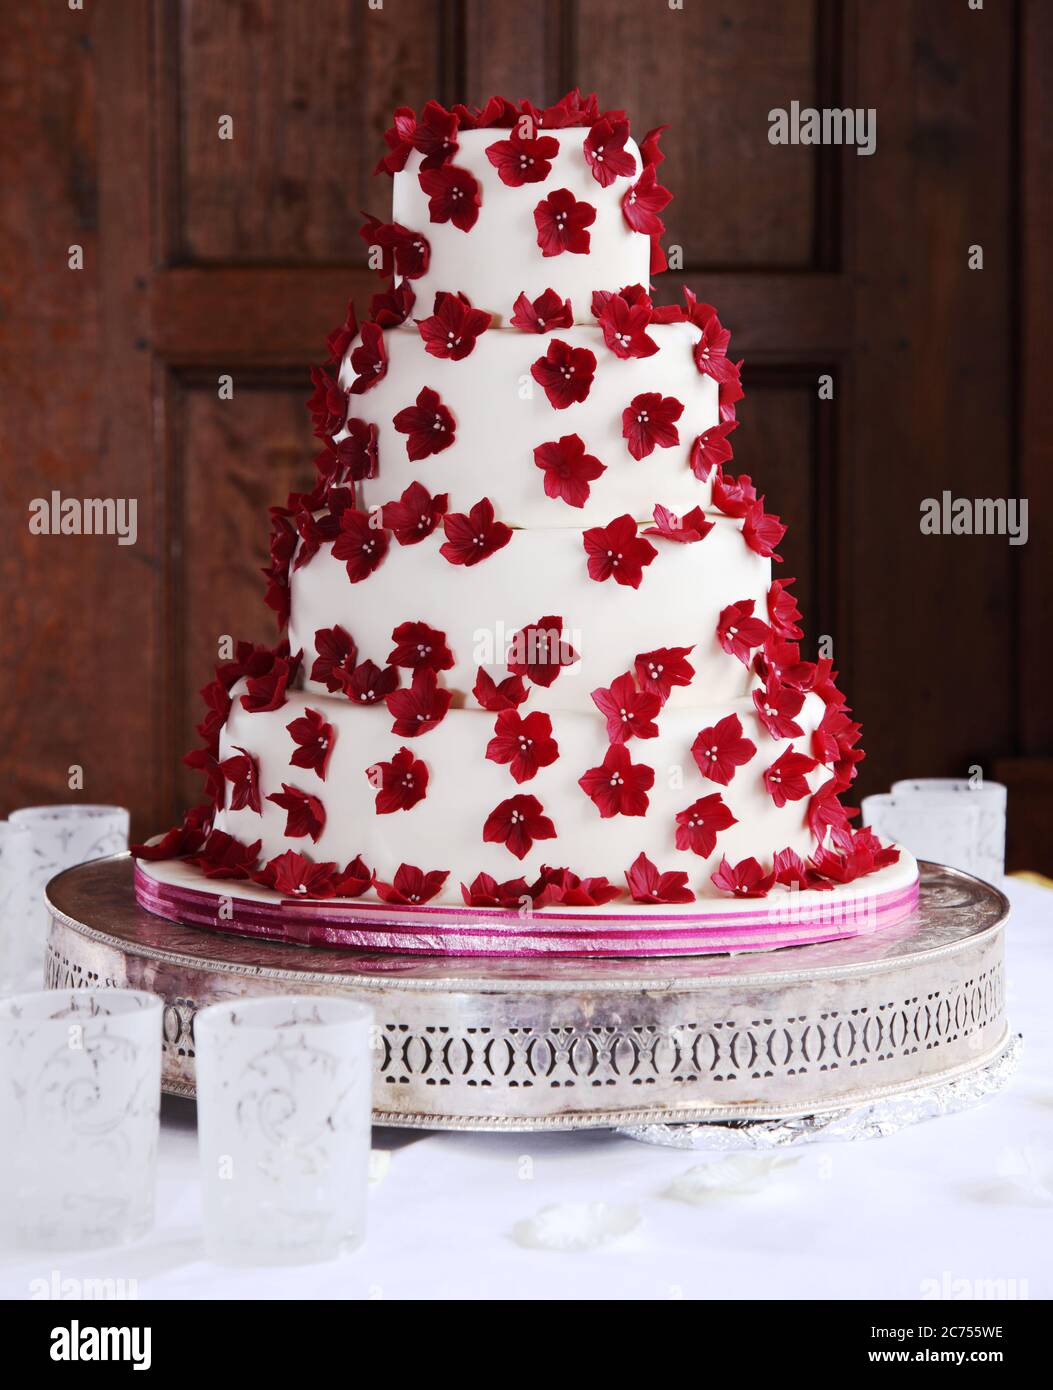 Four tiered wedding cake with red iced sugar flowers Stock Photo